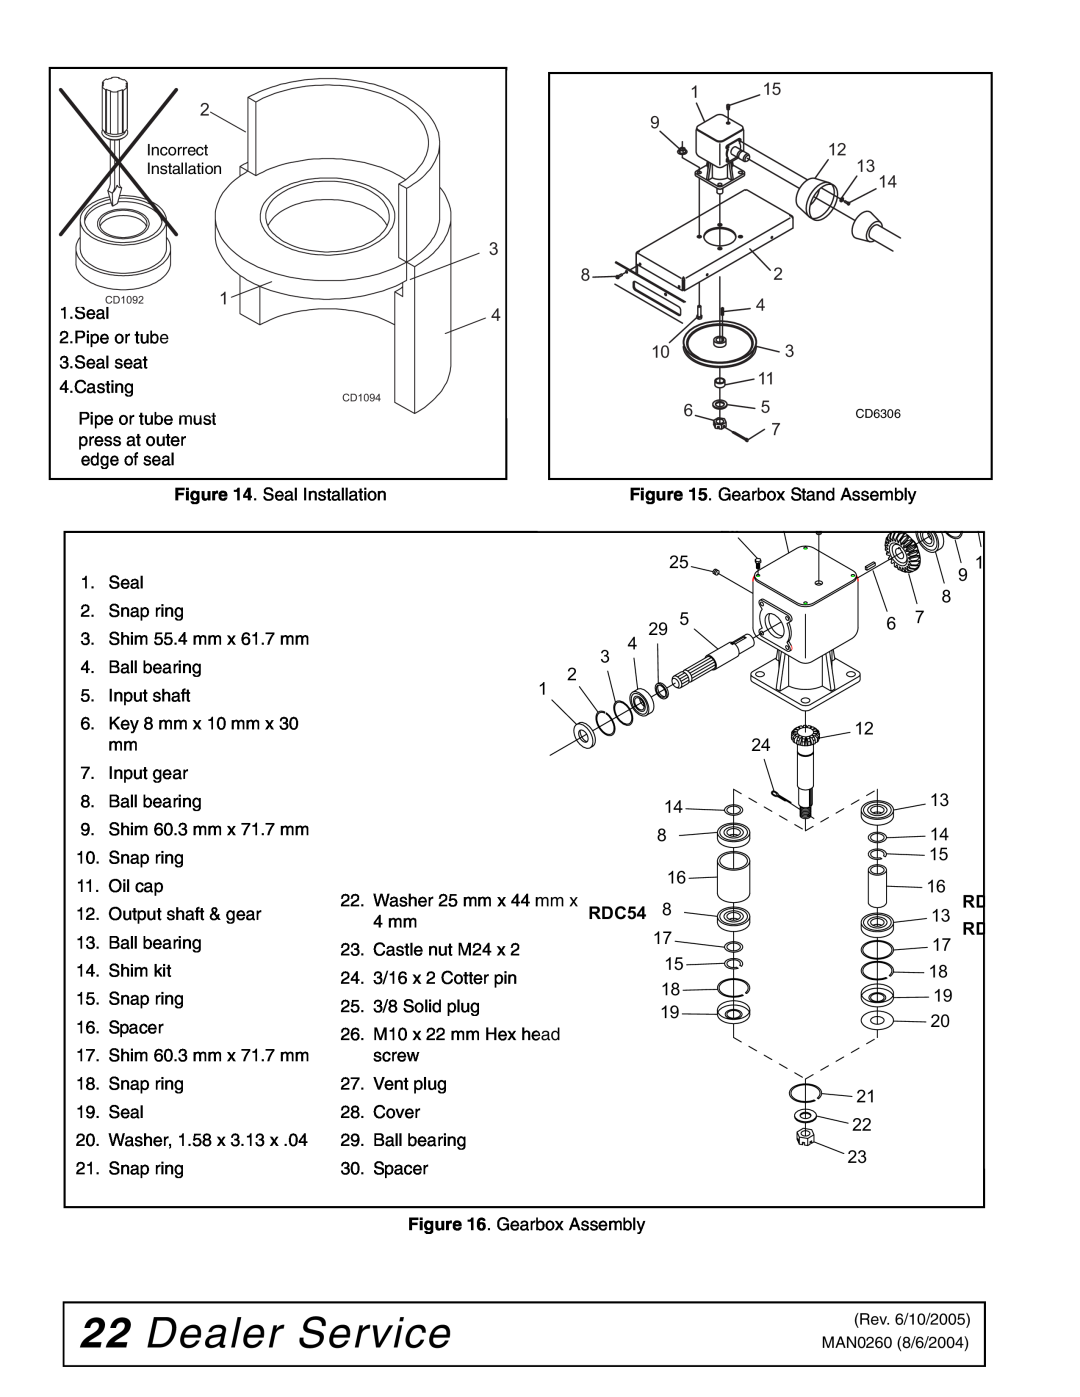 Woods Equipment RDC54, RD60, RD72 manual Dealer Service, Seal Installation, Gearbox Stand Assembly 